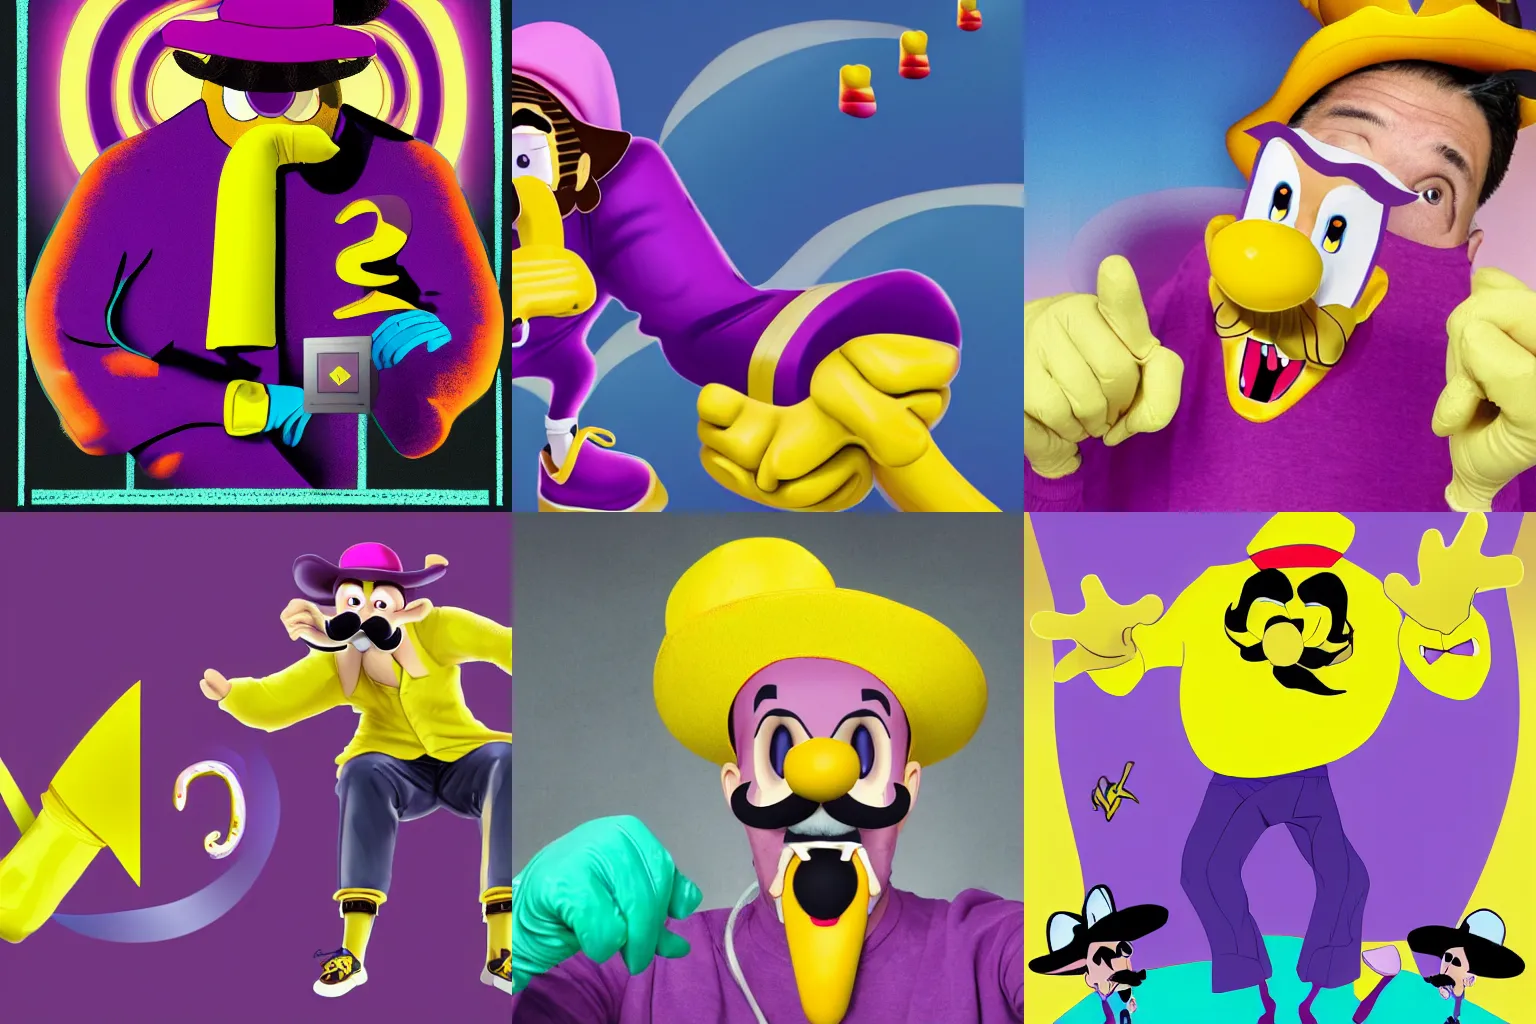 Prompt: a man with a long pinkish nose, a moustache like Salvador Dali,long-sleeved purple shirt, a purple hat with a yellow Γ symbol (an inverted L, paralleling Wario's W as an upside-down M), orange shoes, and white gloves with a yellow Γ symbol as well. Digital art